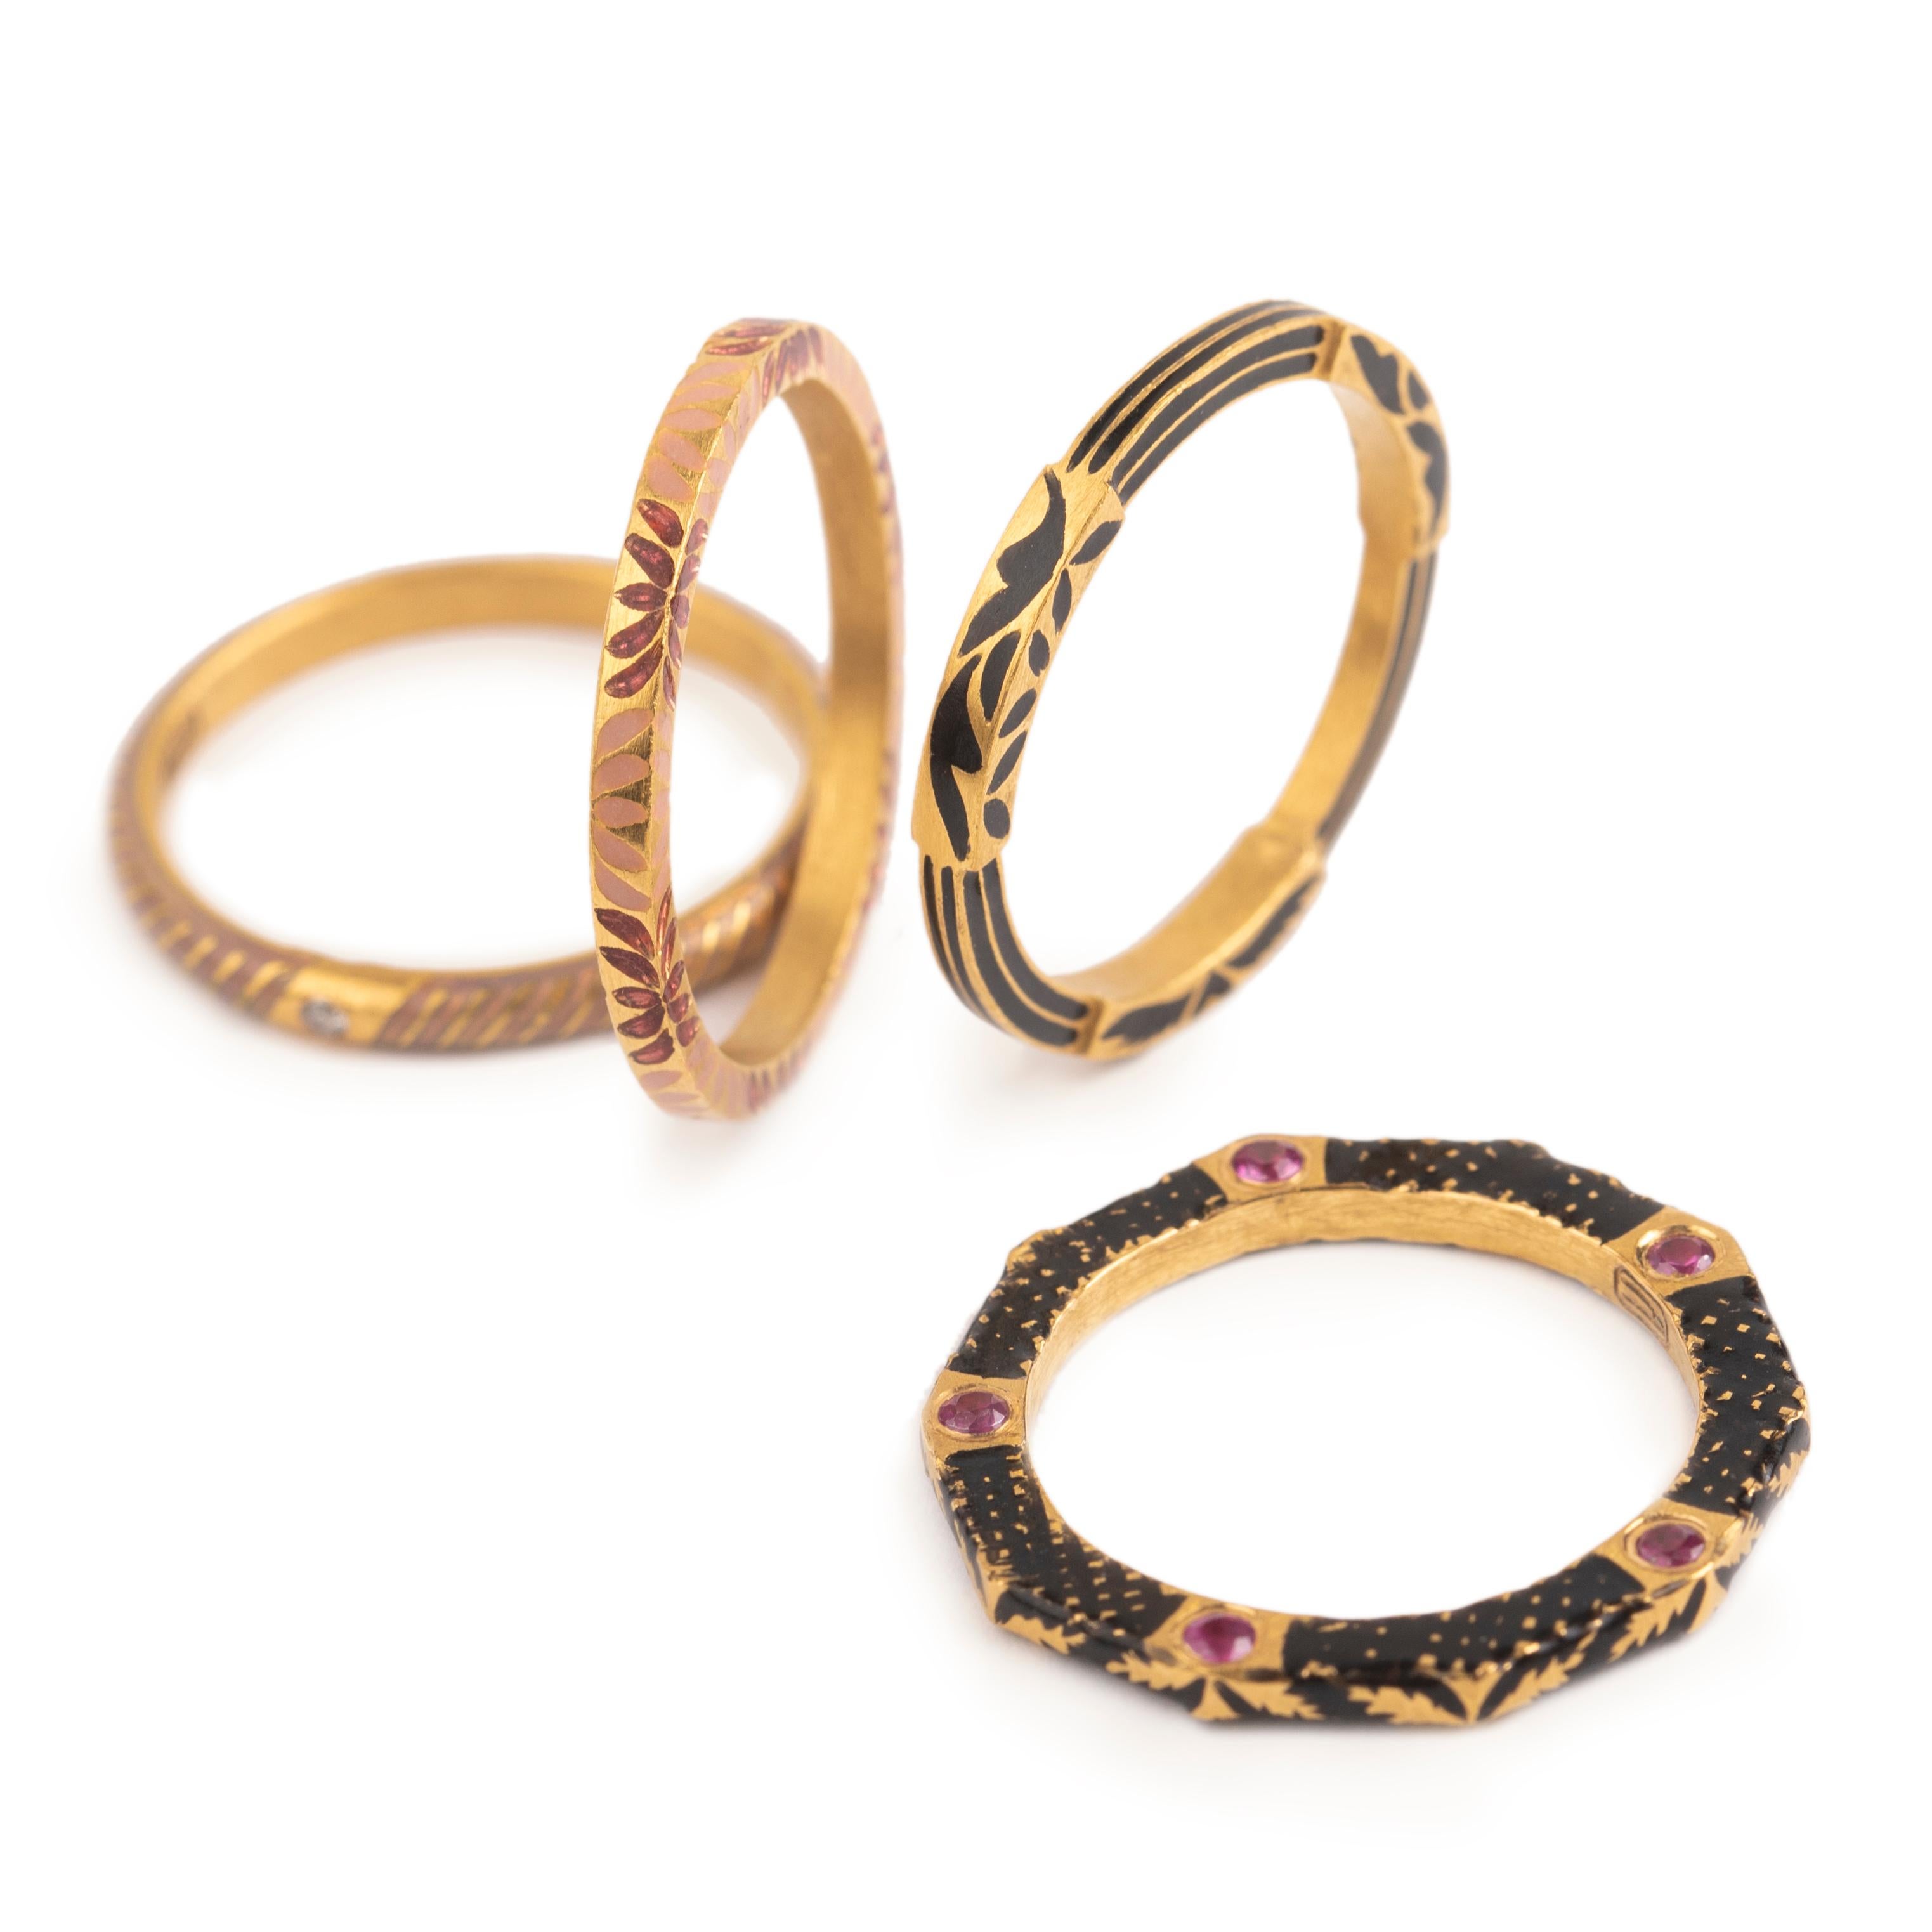 For Sale:  22K Gold Handmade Floral Enamel Stackable Infinity Band Rings Set of 4 by Agaro 2